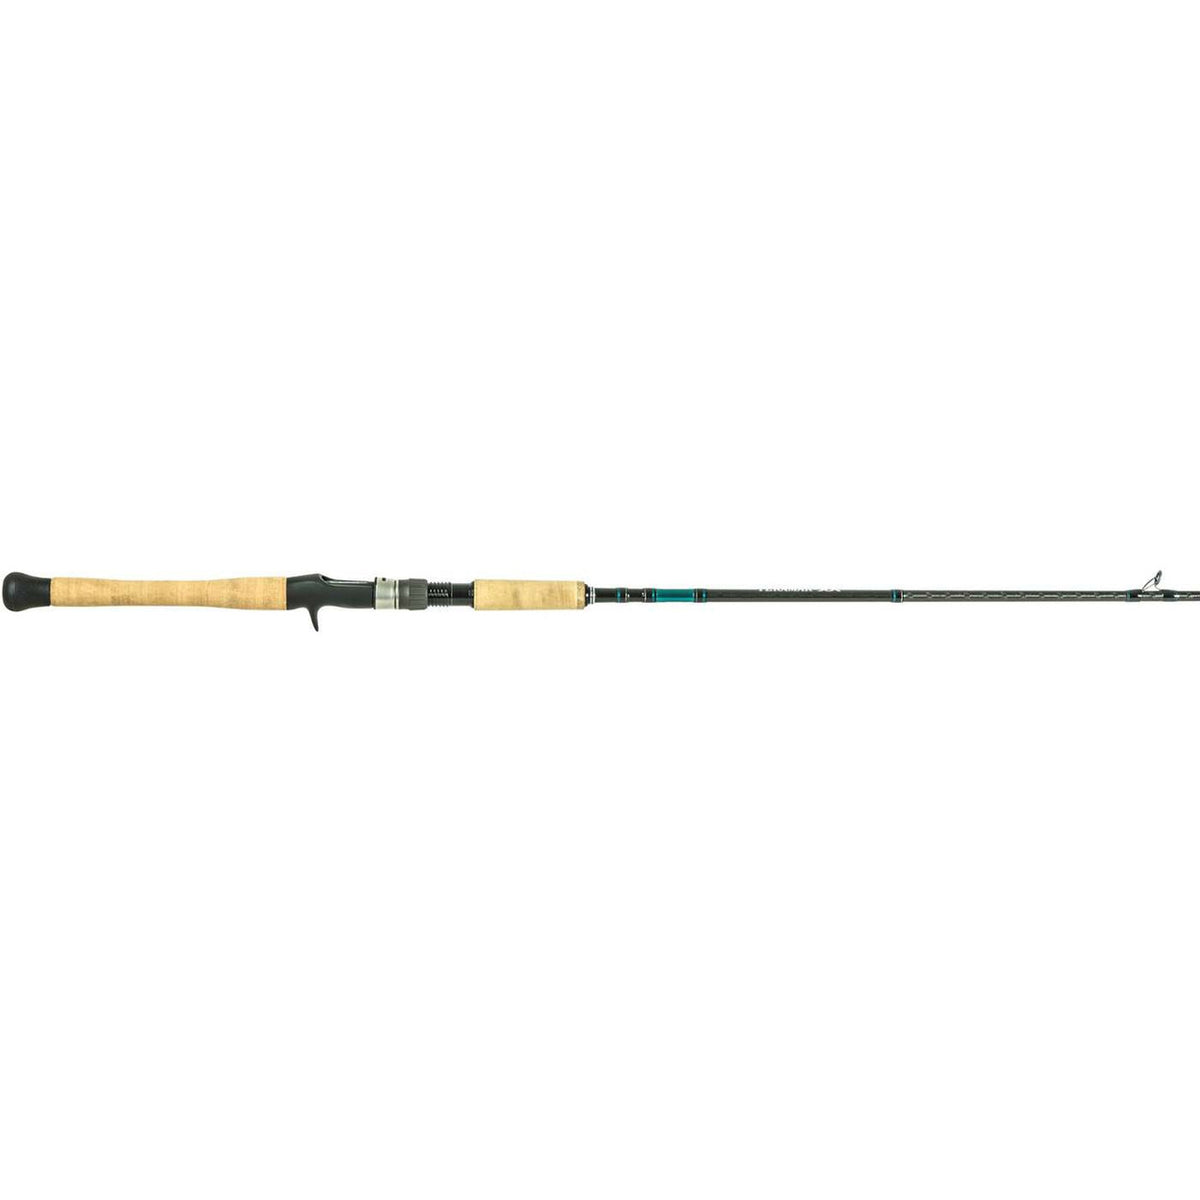 SHIMANO Teramar XX South East Casting 7FT6IN Heavy